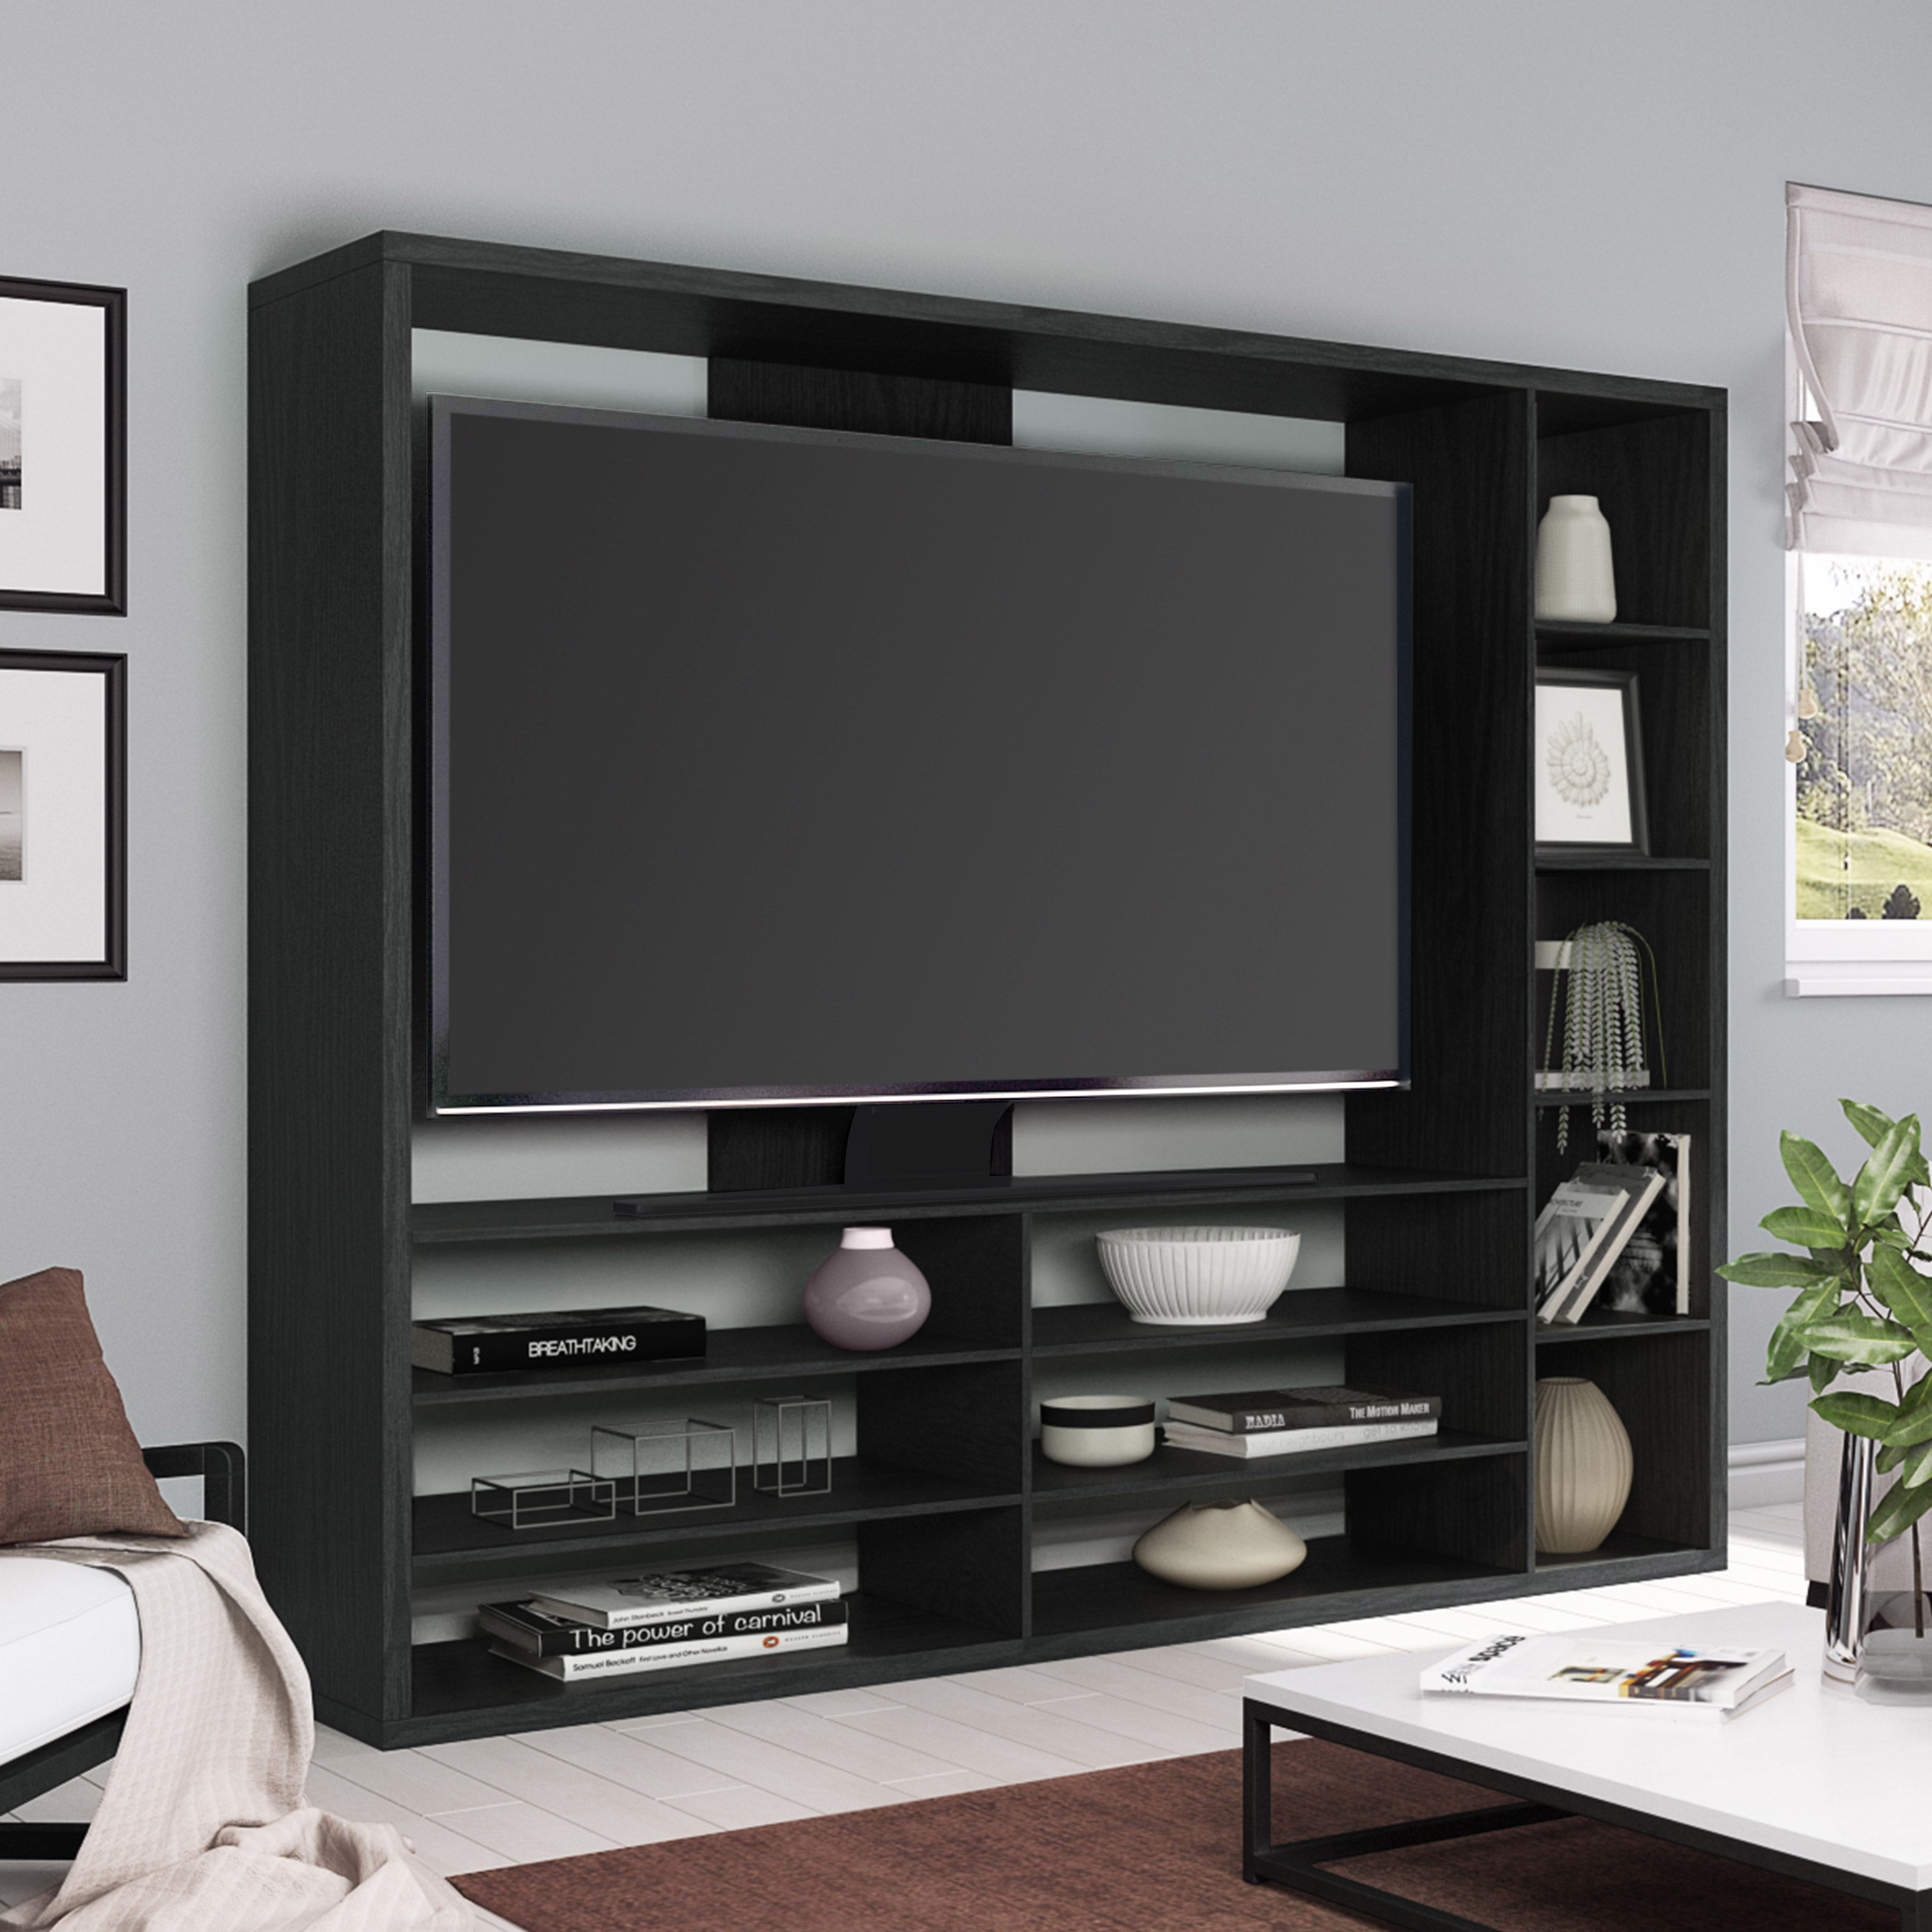 Mainstays Entertainment Center for TVs up to 55", Black - image 1 of 6